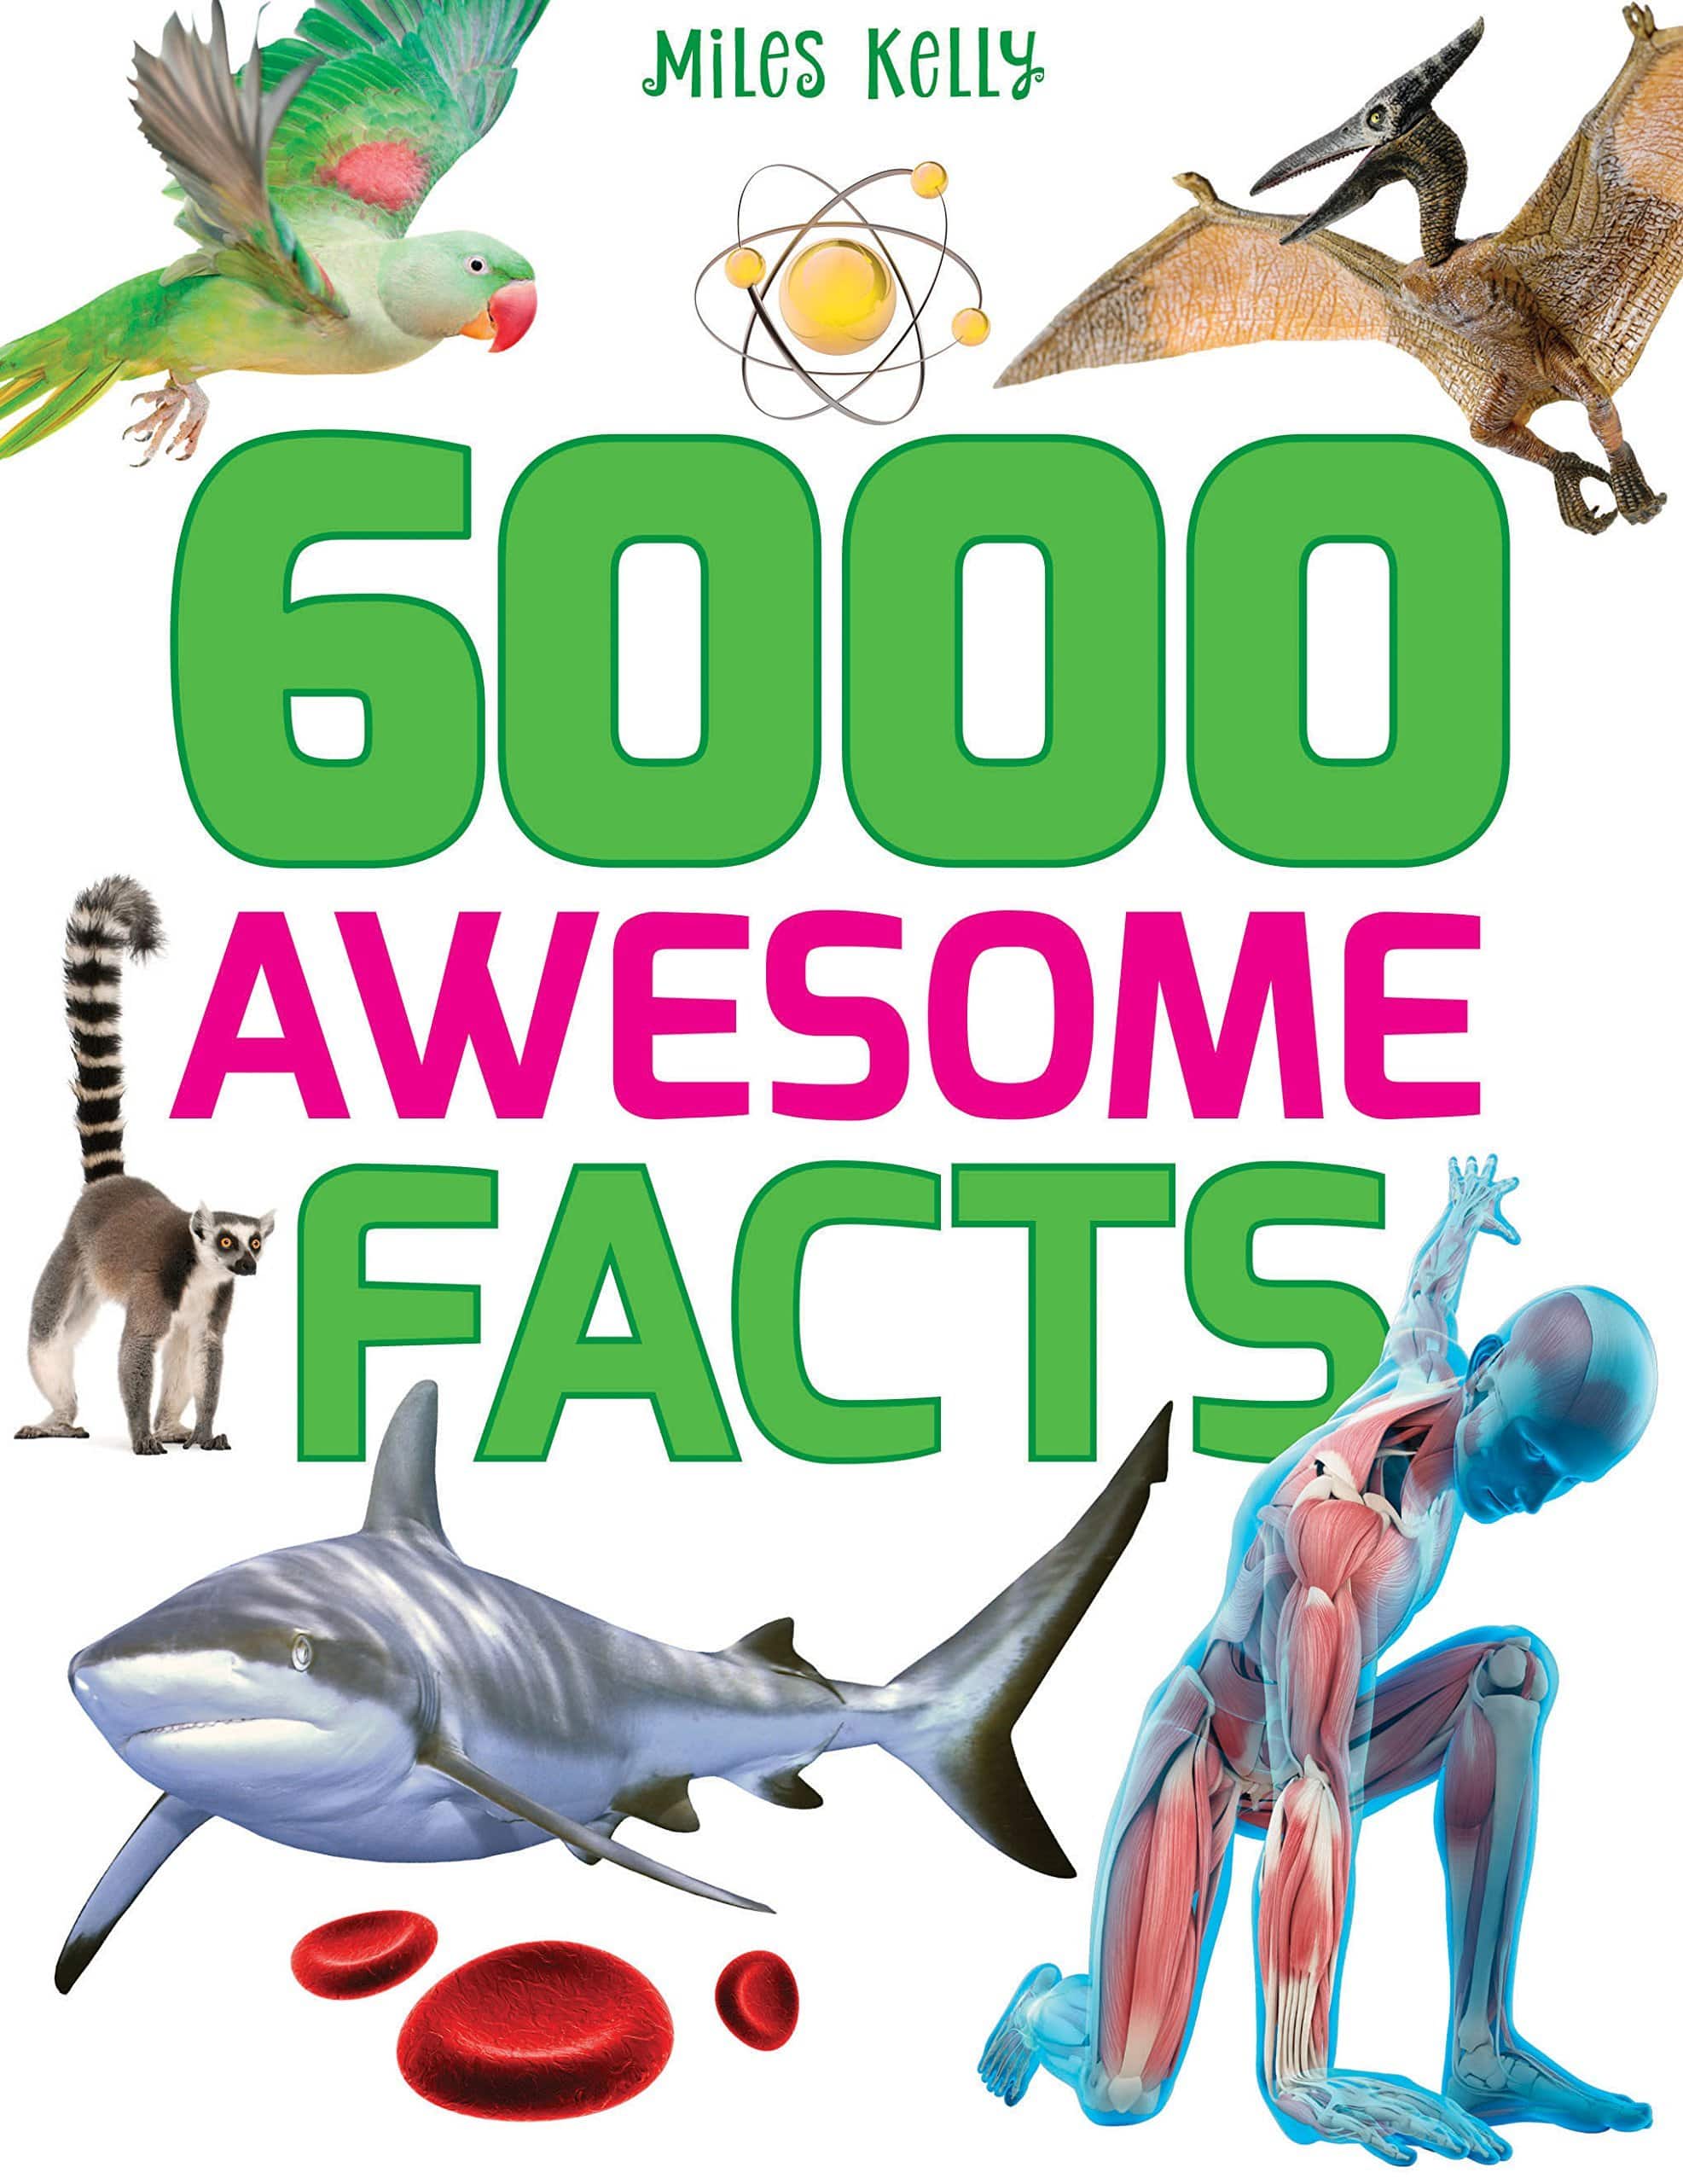 6000 AWESOME FACTS-MILES KELLY - Jashanmal Home